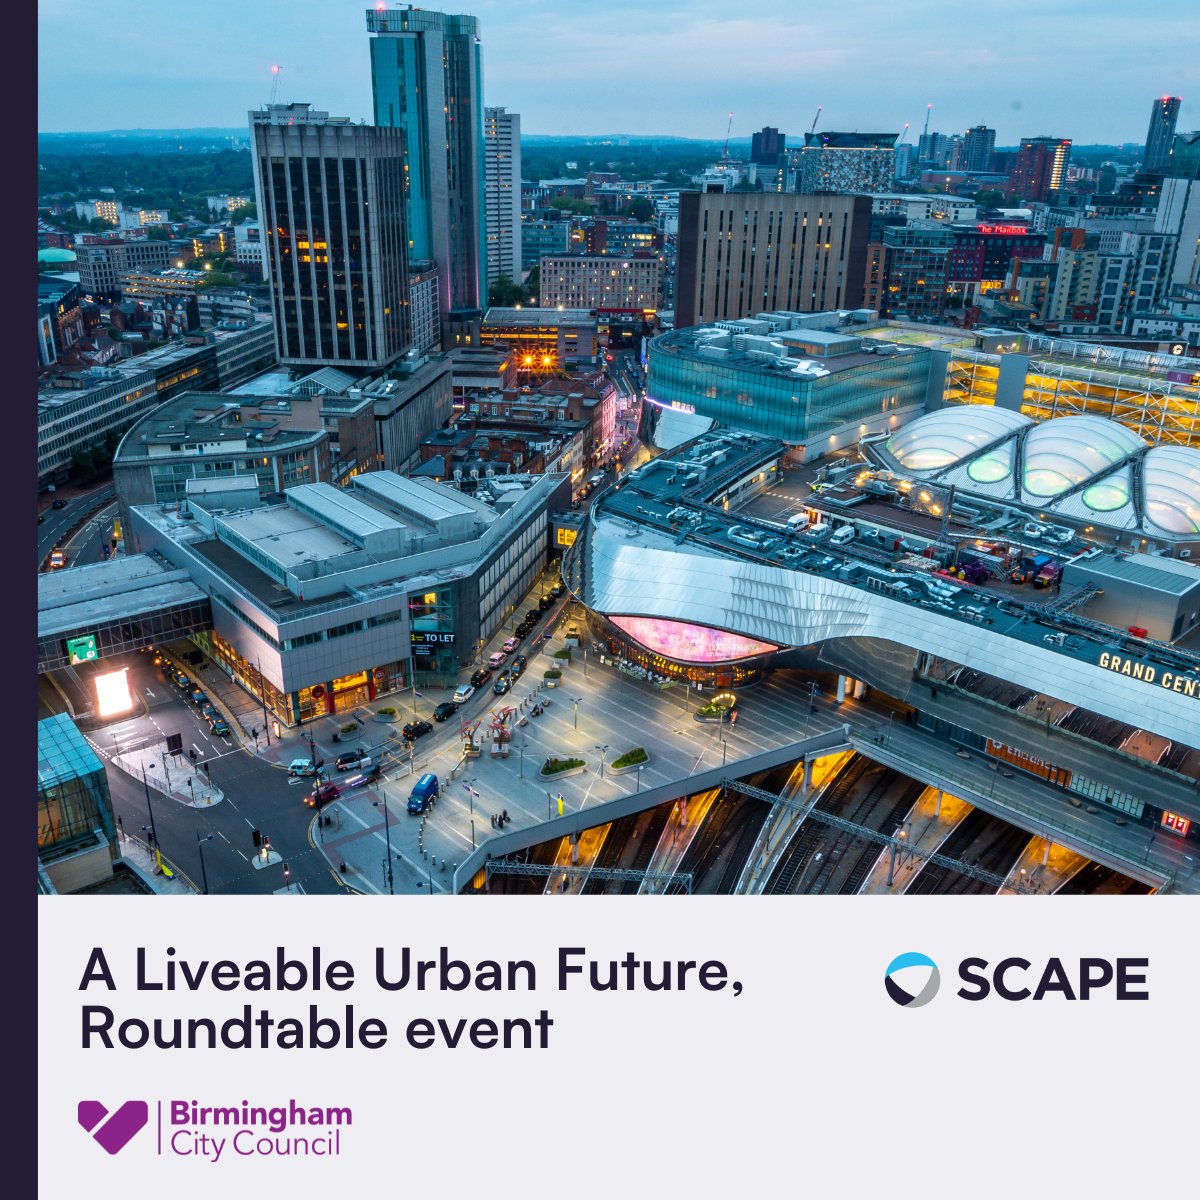 It was fantastic to support Birmingham City Council with their 'Liveable Urban Future' roundtable event last week. The event explored Birmingham City Council's 'Our Future City' plan, a comprehensive development framework set to guide the city's progress through 2040.